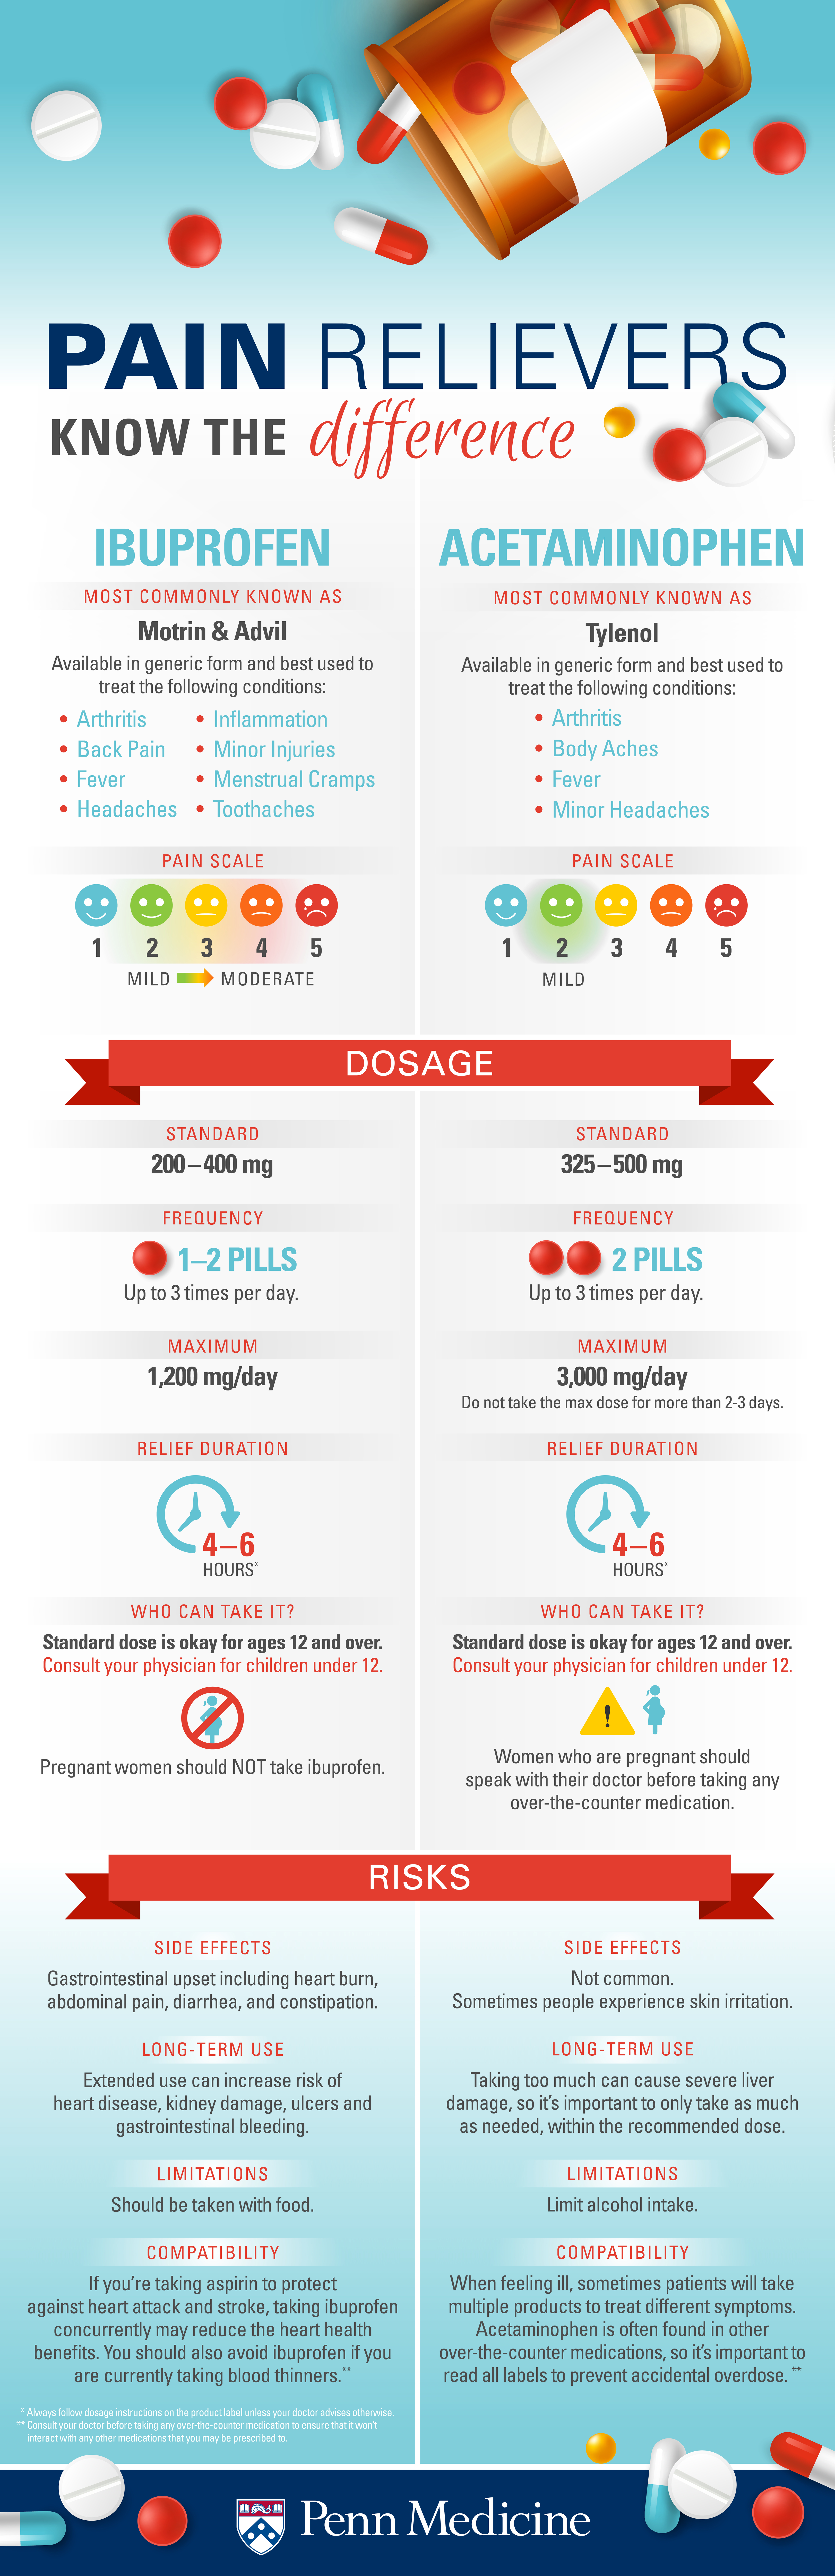 ibuprofen_acetaminophen_know_the_difference_names_dosage_uses_risks_infographic